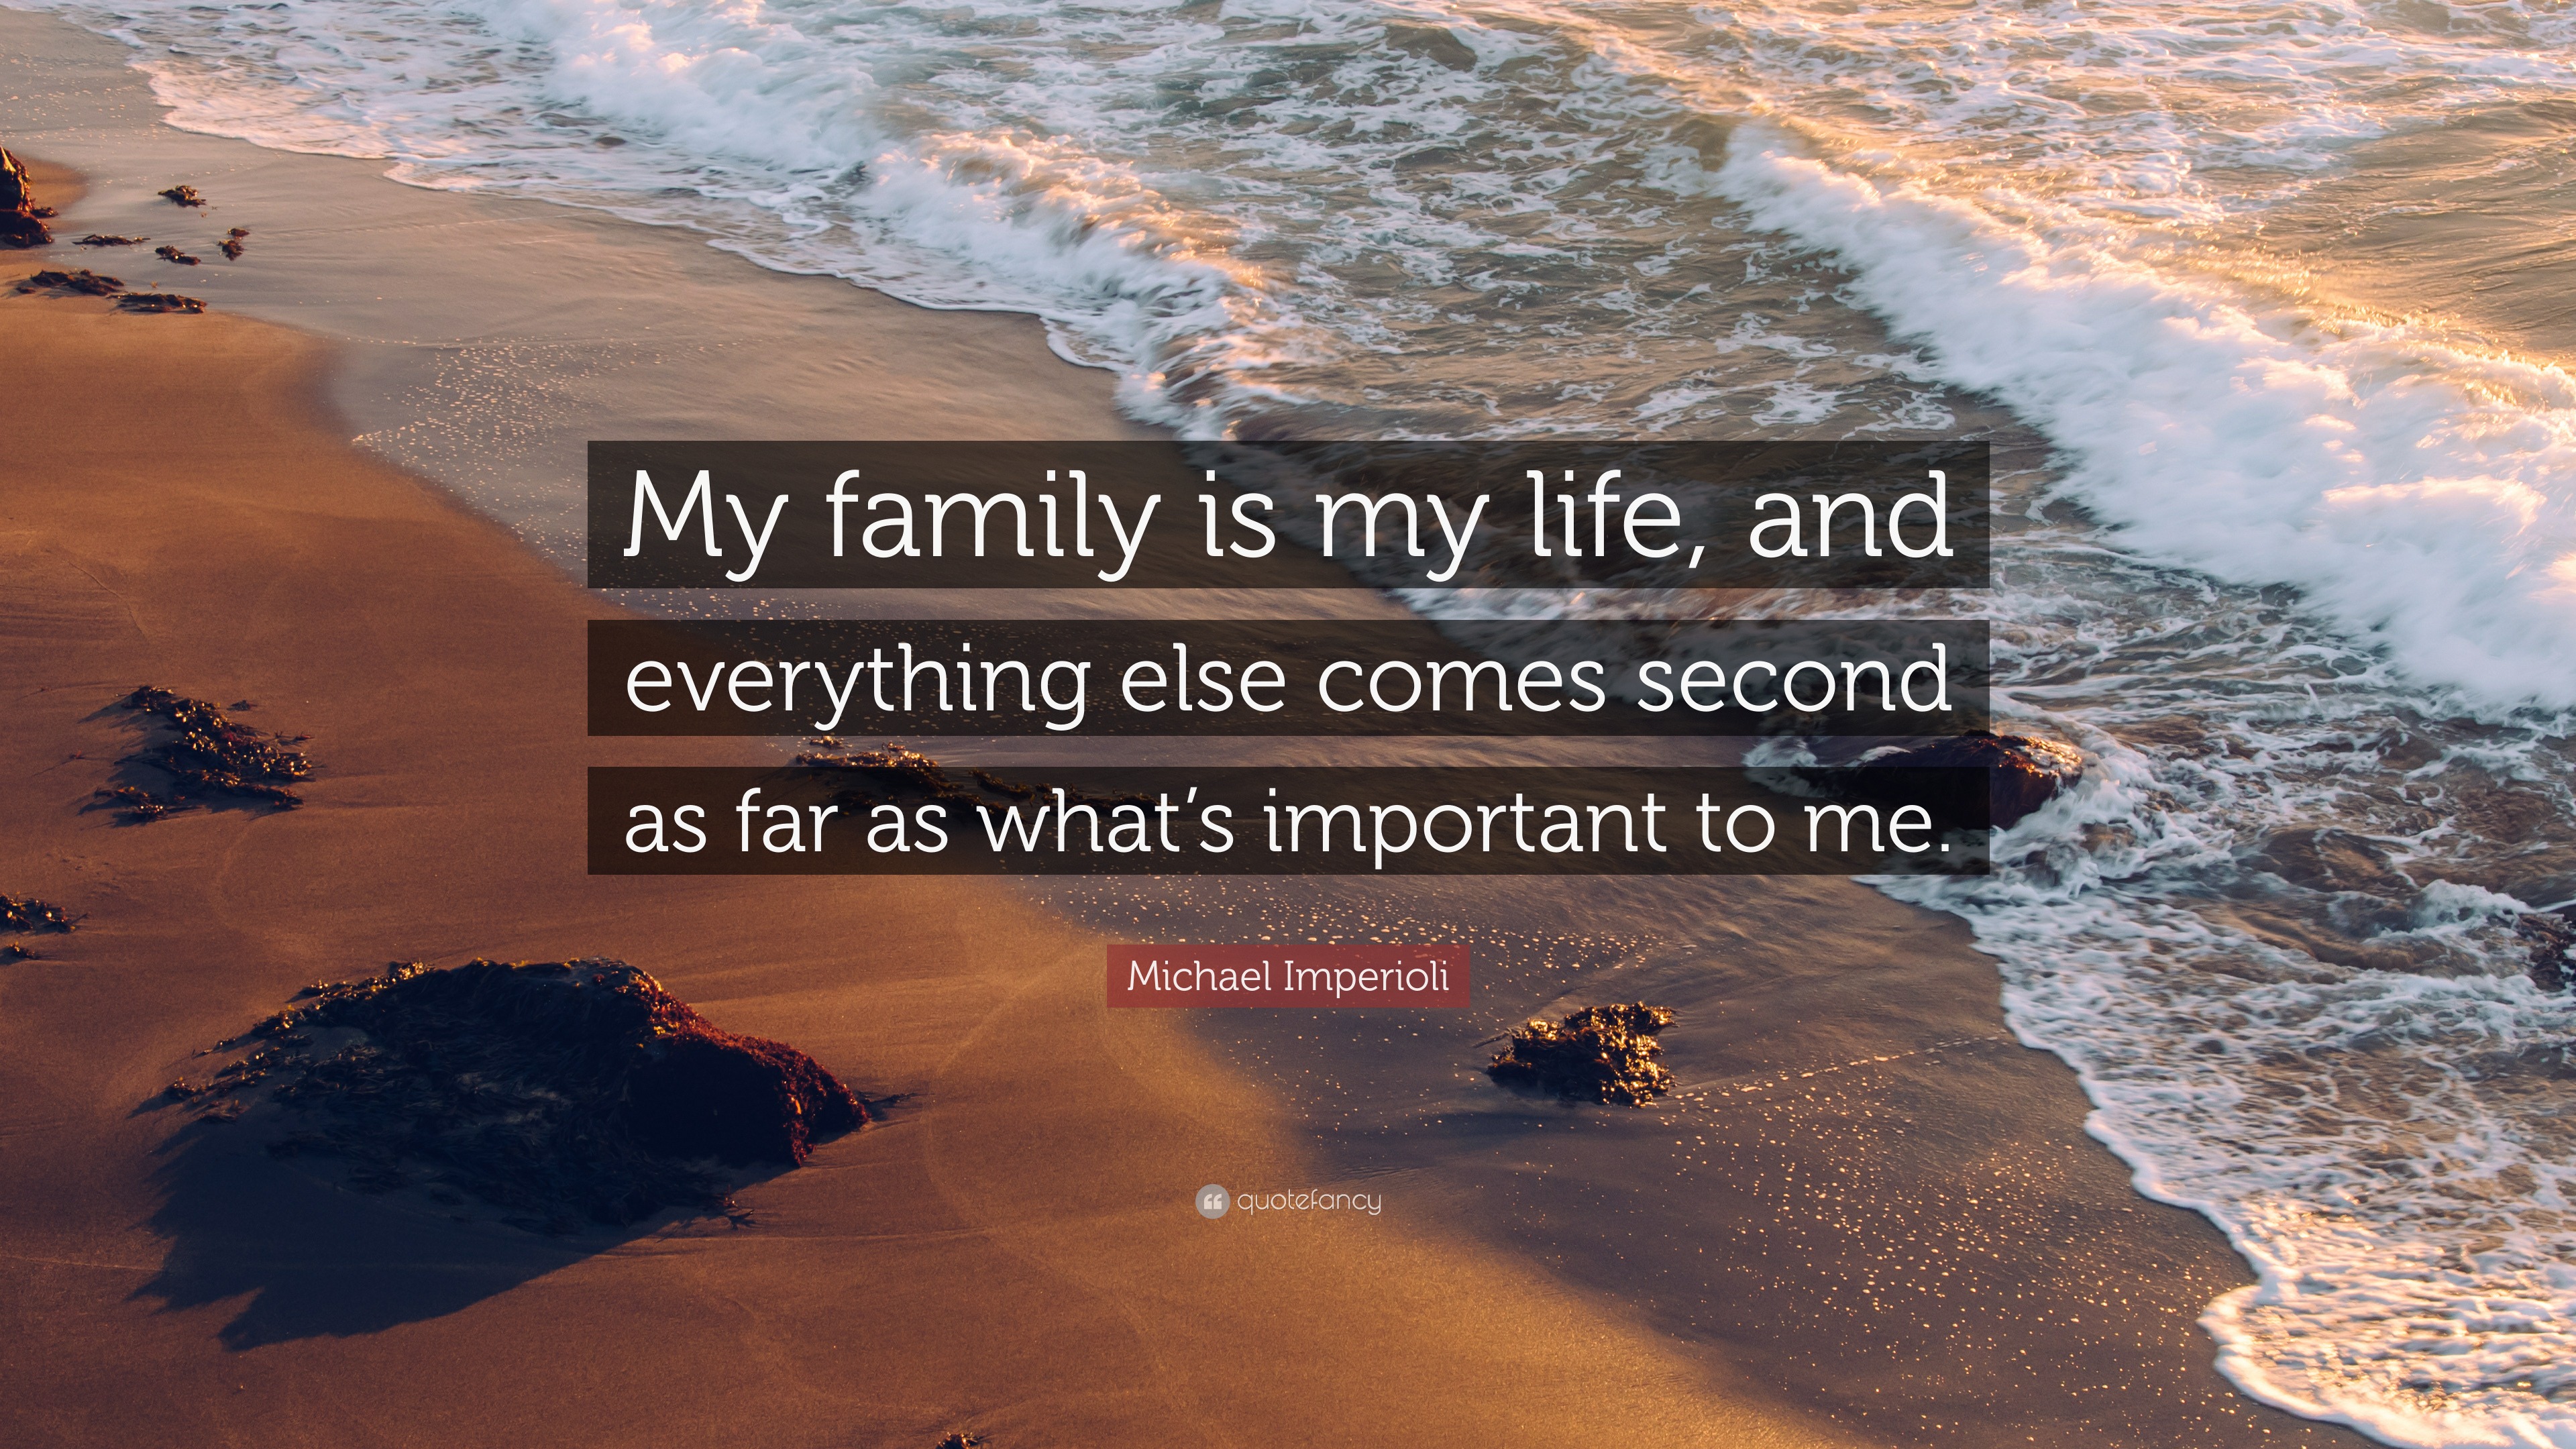 Michael Imperioli Quote: “My family is my life, and everything else ...